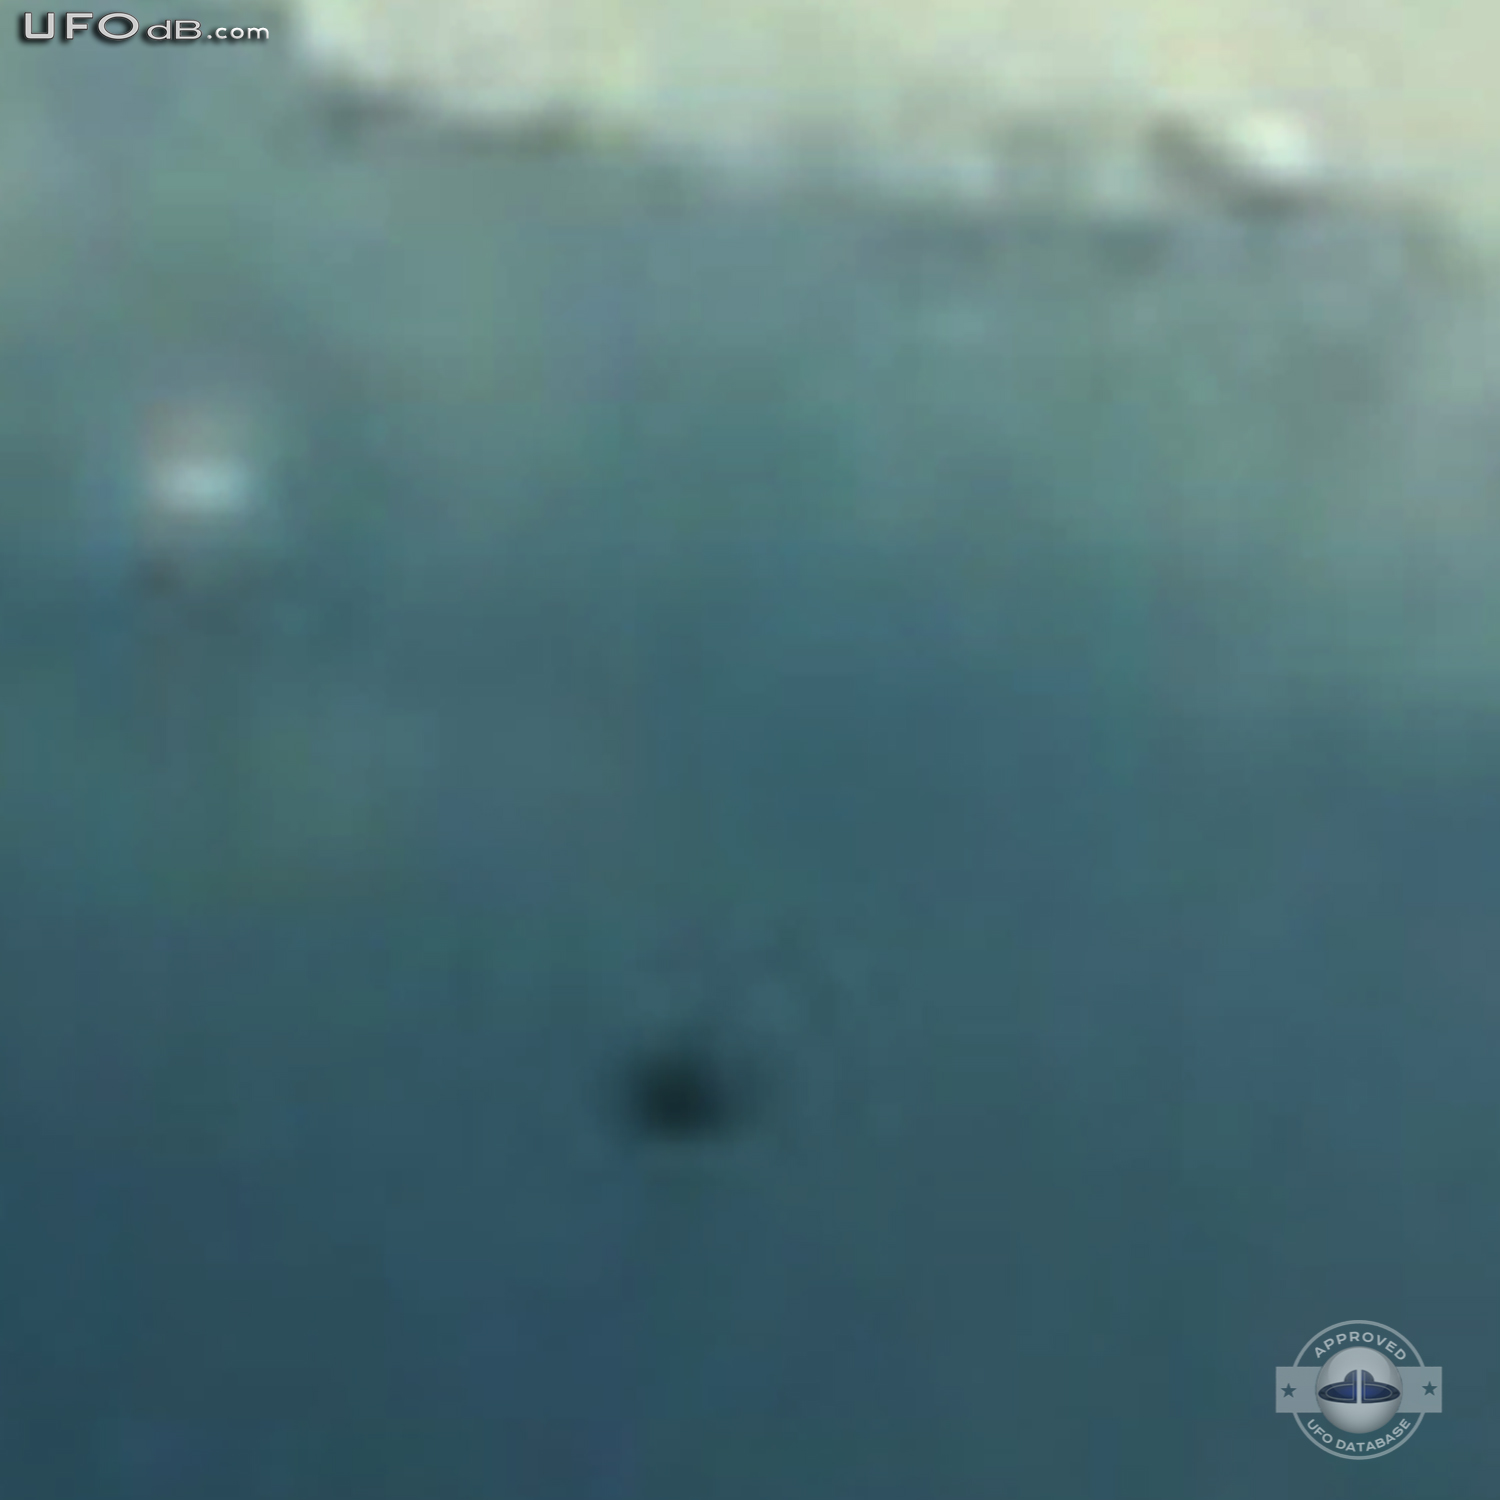 Group of UFOs hiding in the clouds in Cedar City, Utah | May 14 2011 UFO Picture #303-6